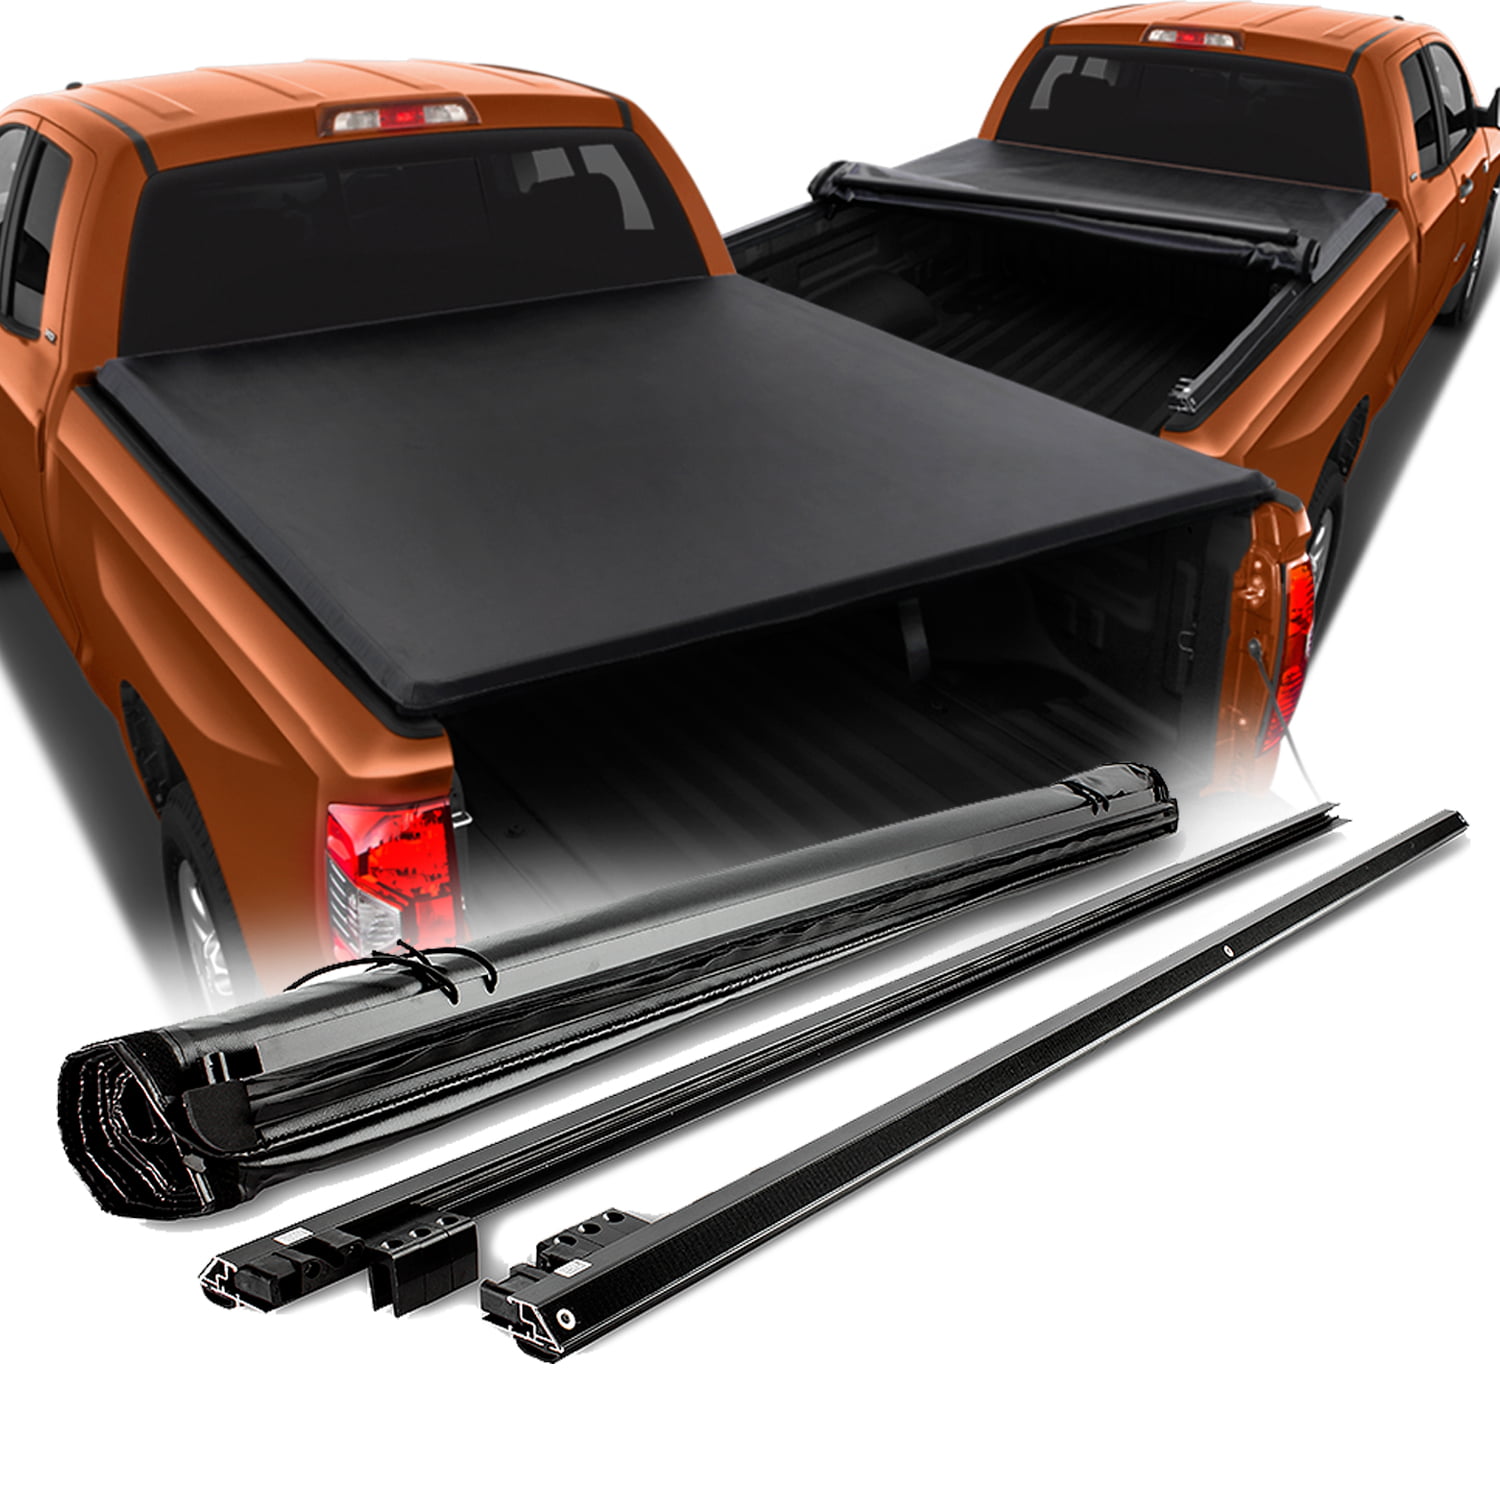 Soft Roll Up Tonneau Cover For 2007-18 Toyota Tundra Standard/Extended 6.5Ft 78"